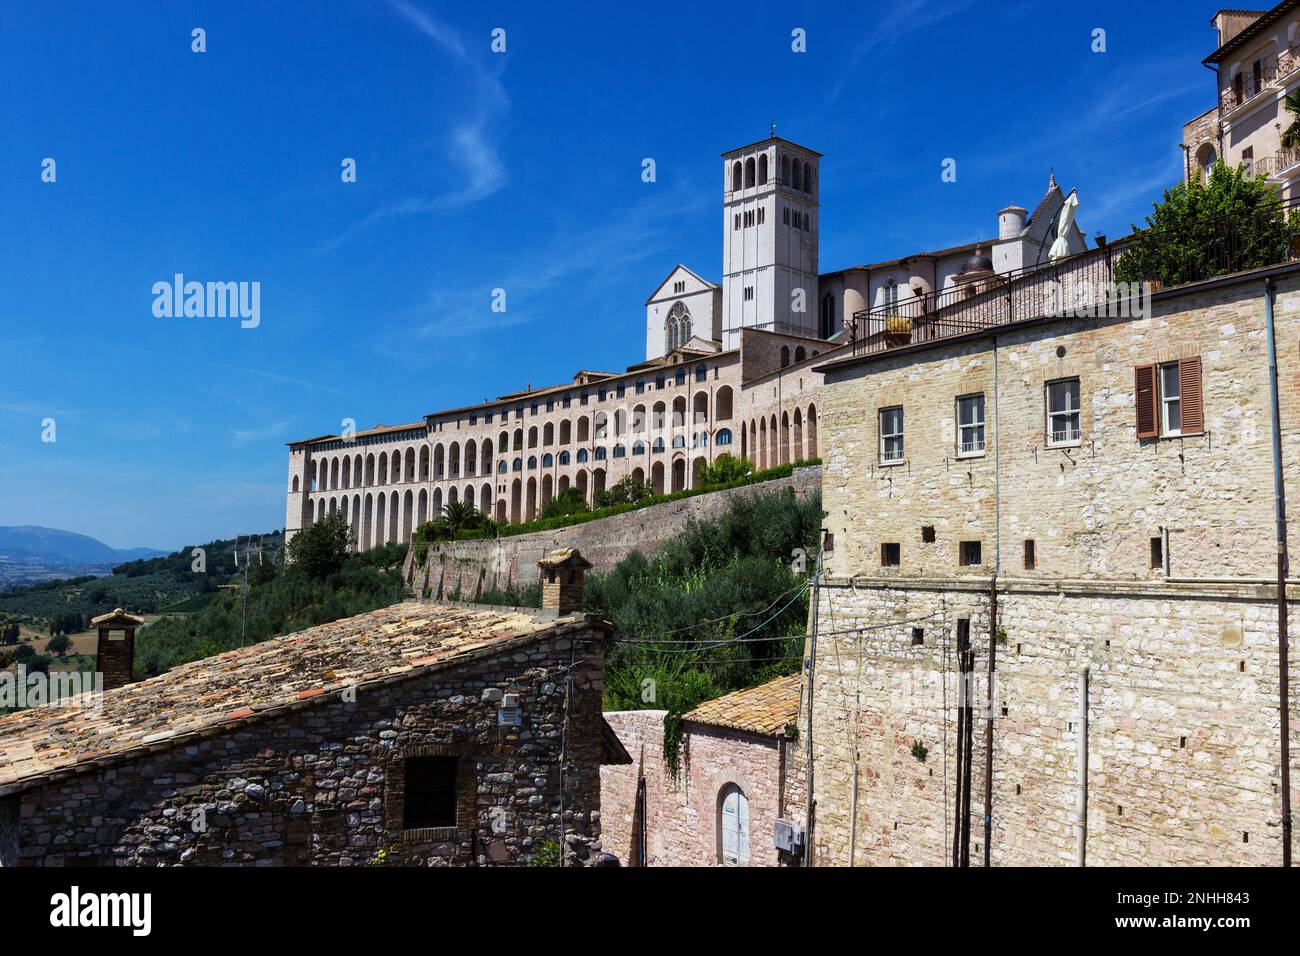 View from the outside of the imposing Basilica of San Francesco in Assisi Stock Photo